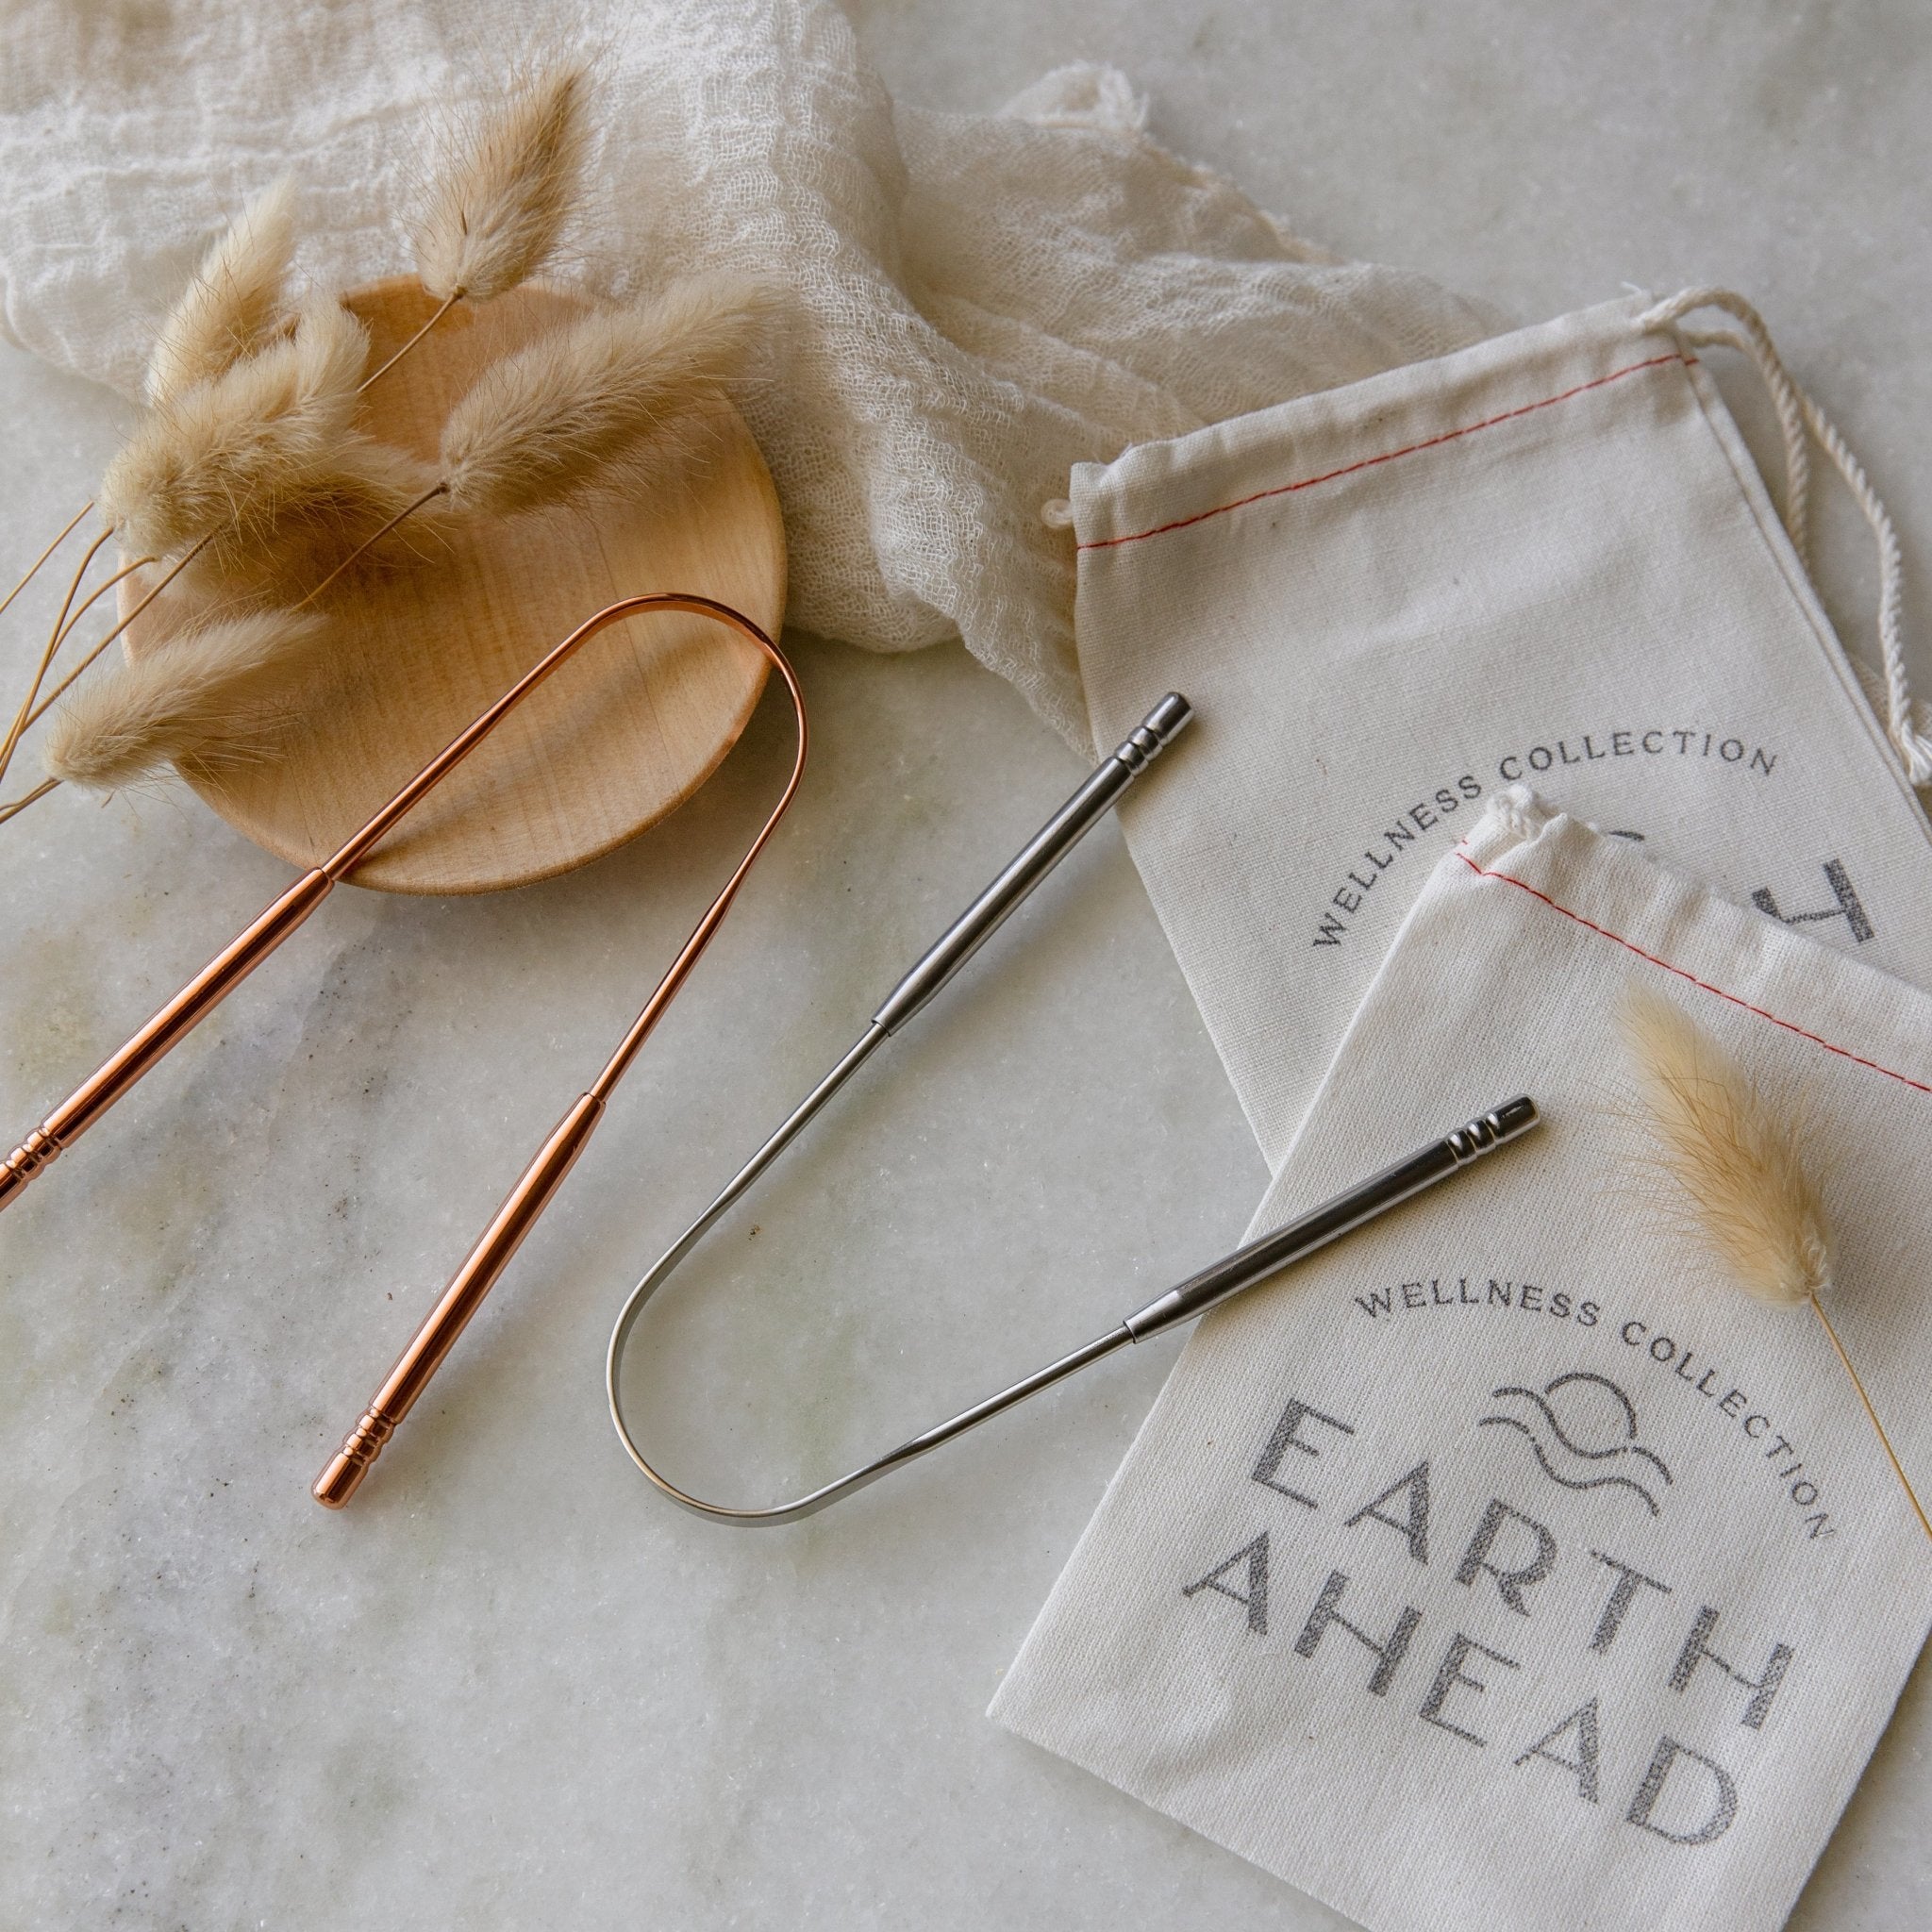 Ayurvedic Rose Gold and Silver Stainless Steel Tongue Scrapers with Wellness Collection Cotton Pouch - Earth Ahead